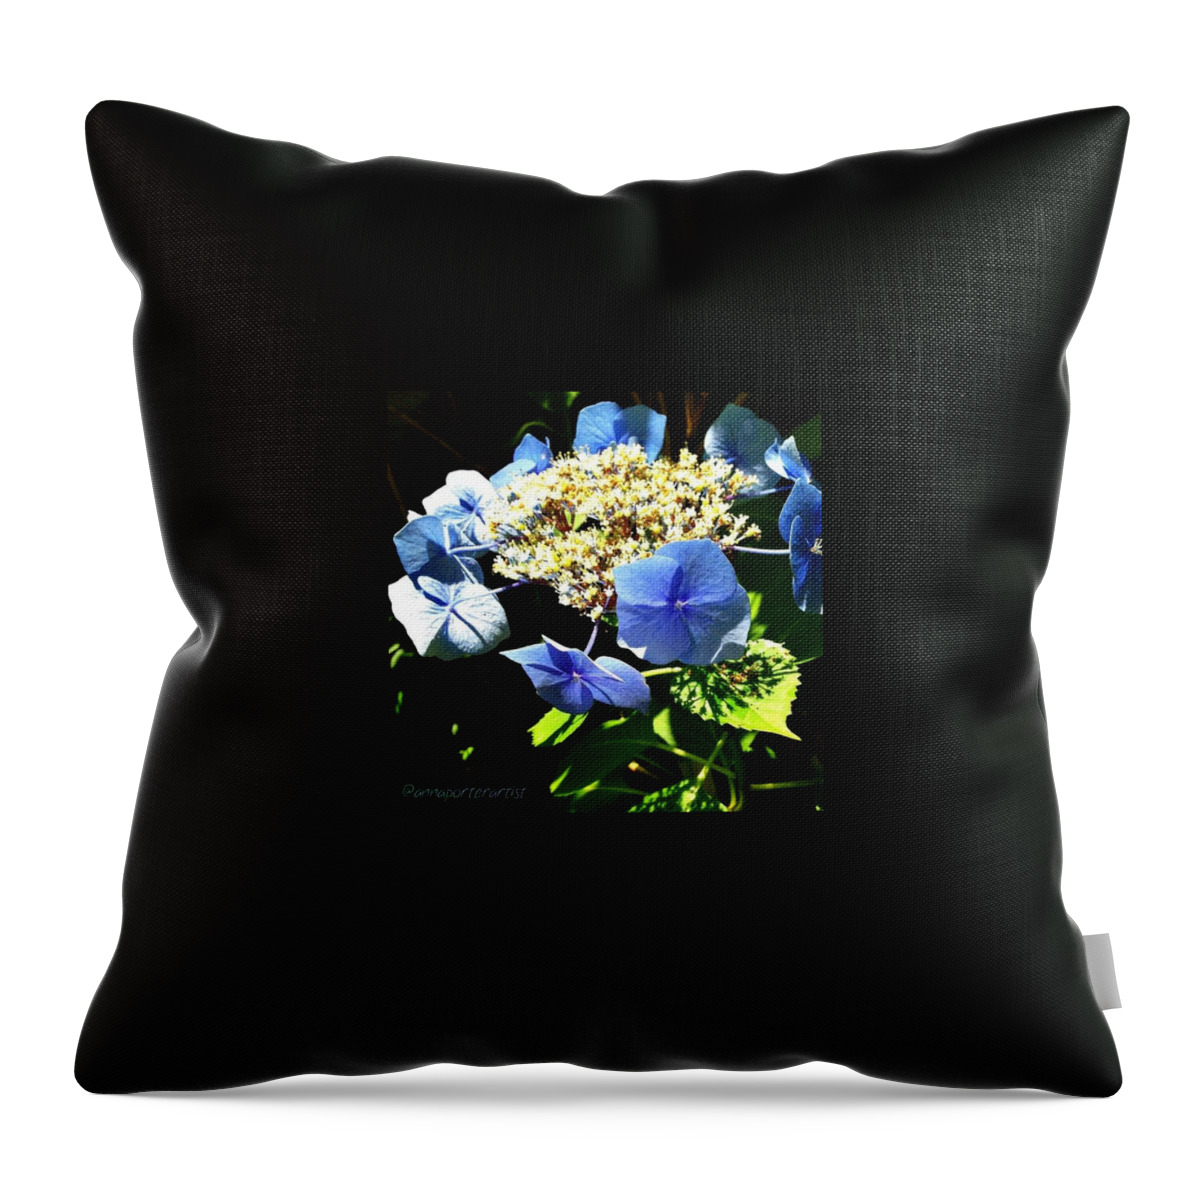 Iphone5 Throw Pillow featuring the photograph Another Variety Of Blue Hydrangea In My by Anna Porter